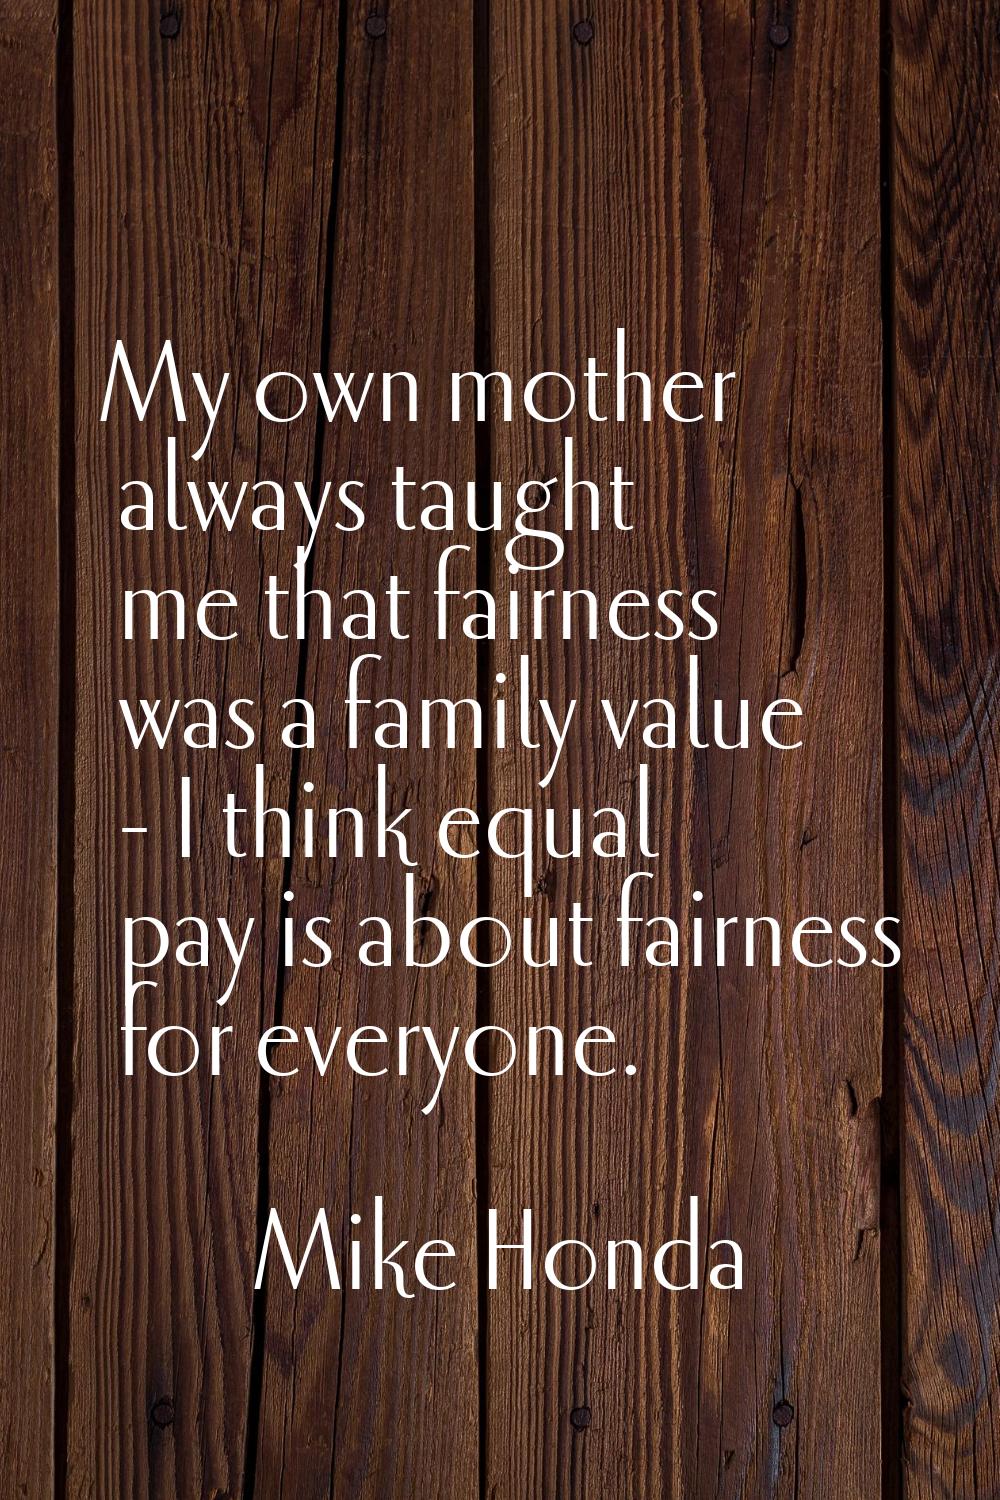 My own mother always taught me that fairness was a family value - I think equal pay is about fairne